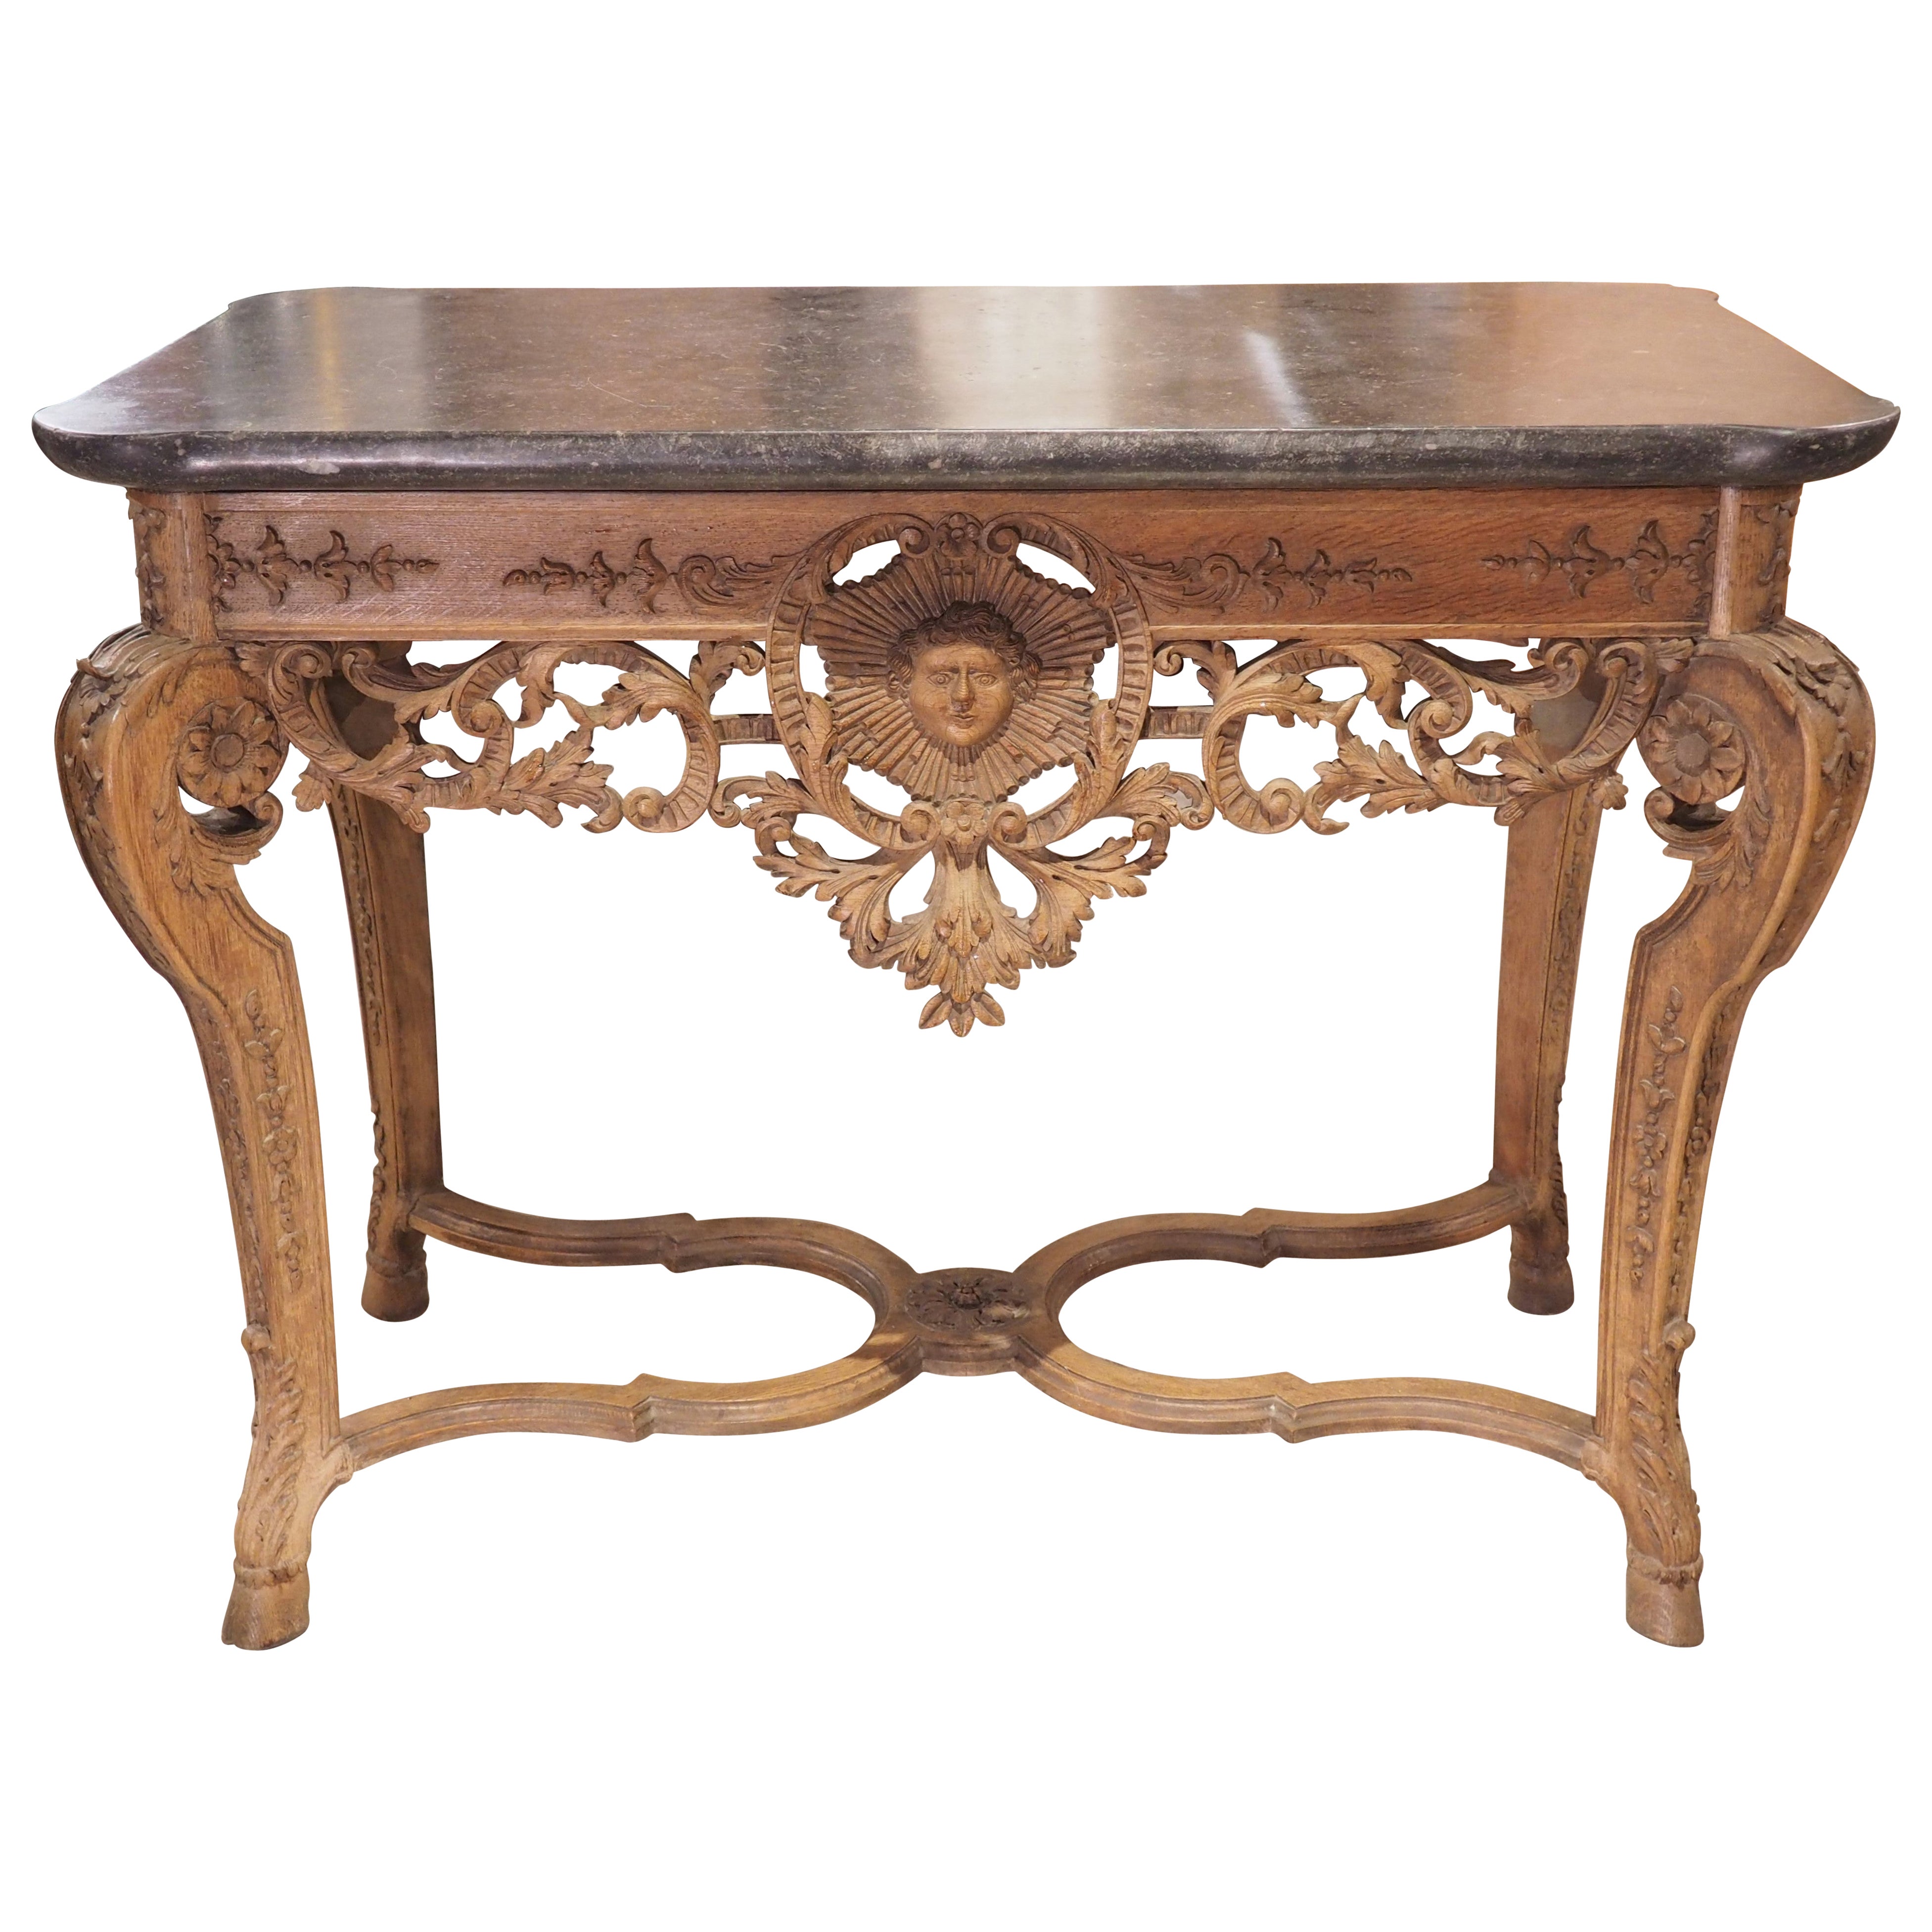 Antique Carved Oak and Bluestone Regence Style Console from Flanders, Circa 1850